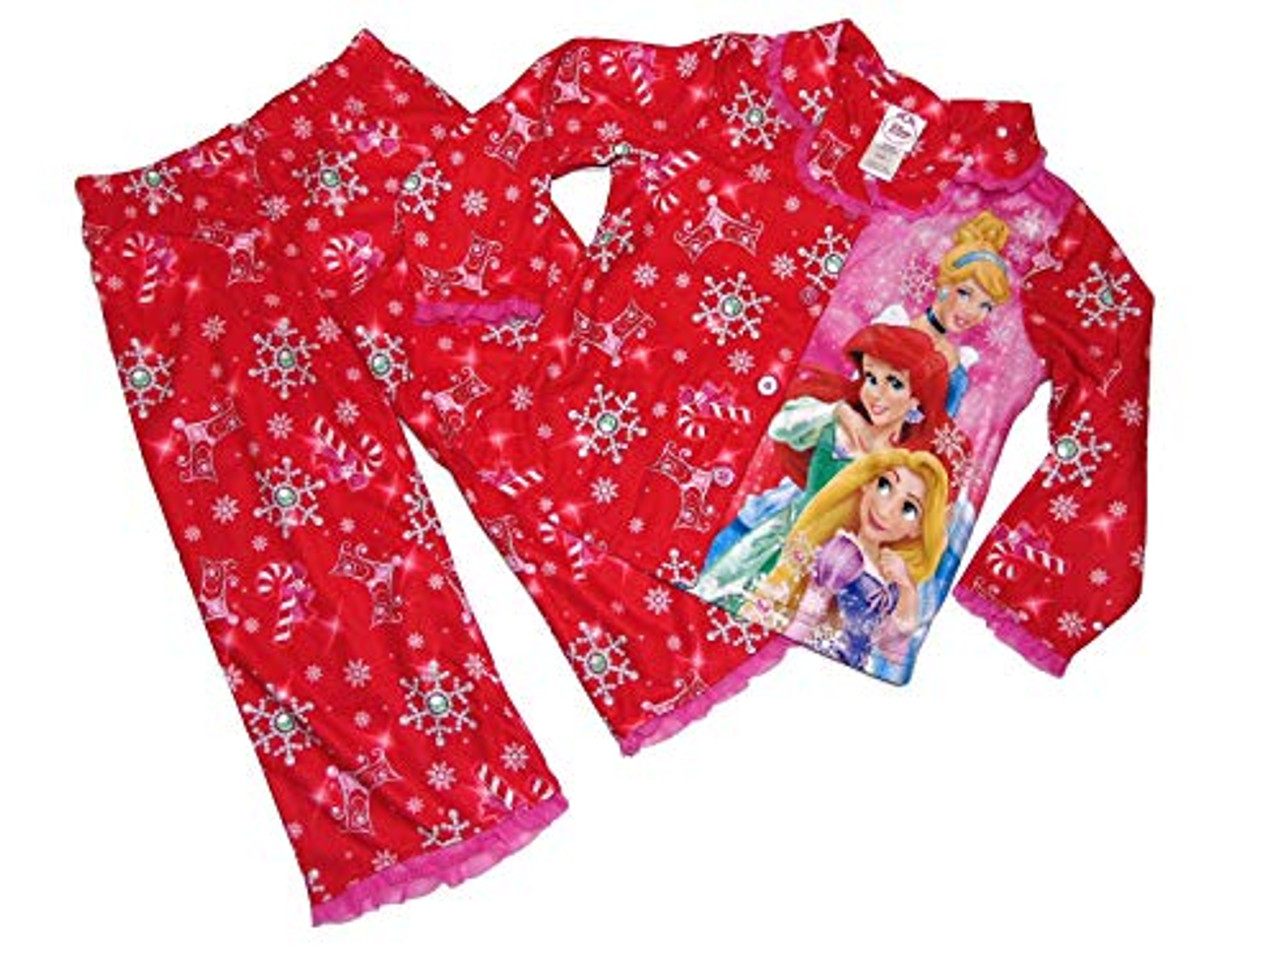 Star Wars Holiday Character Choir The Force Flannel Coat Pajama Set